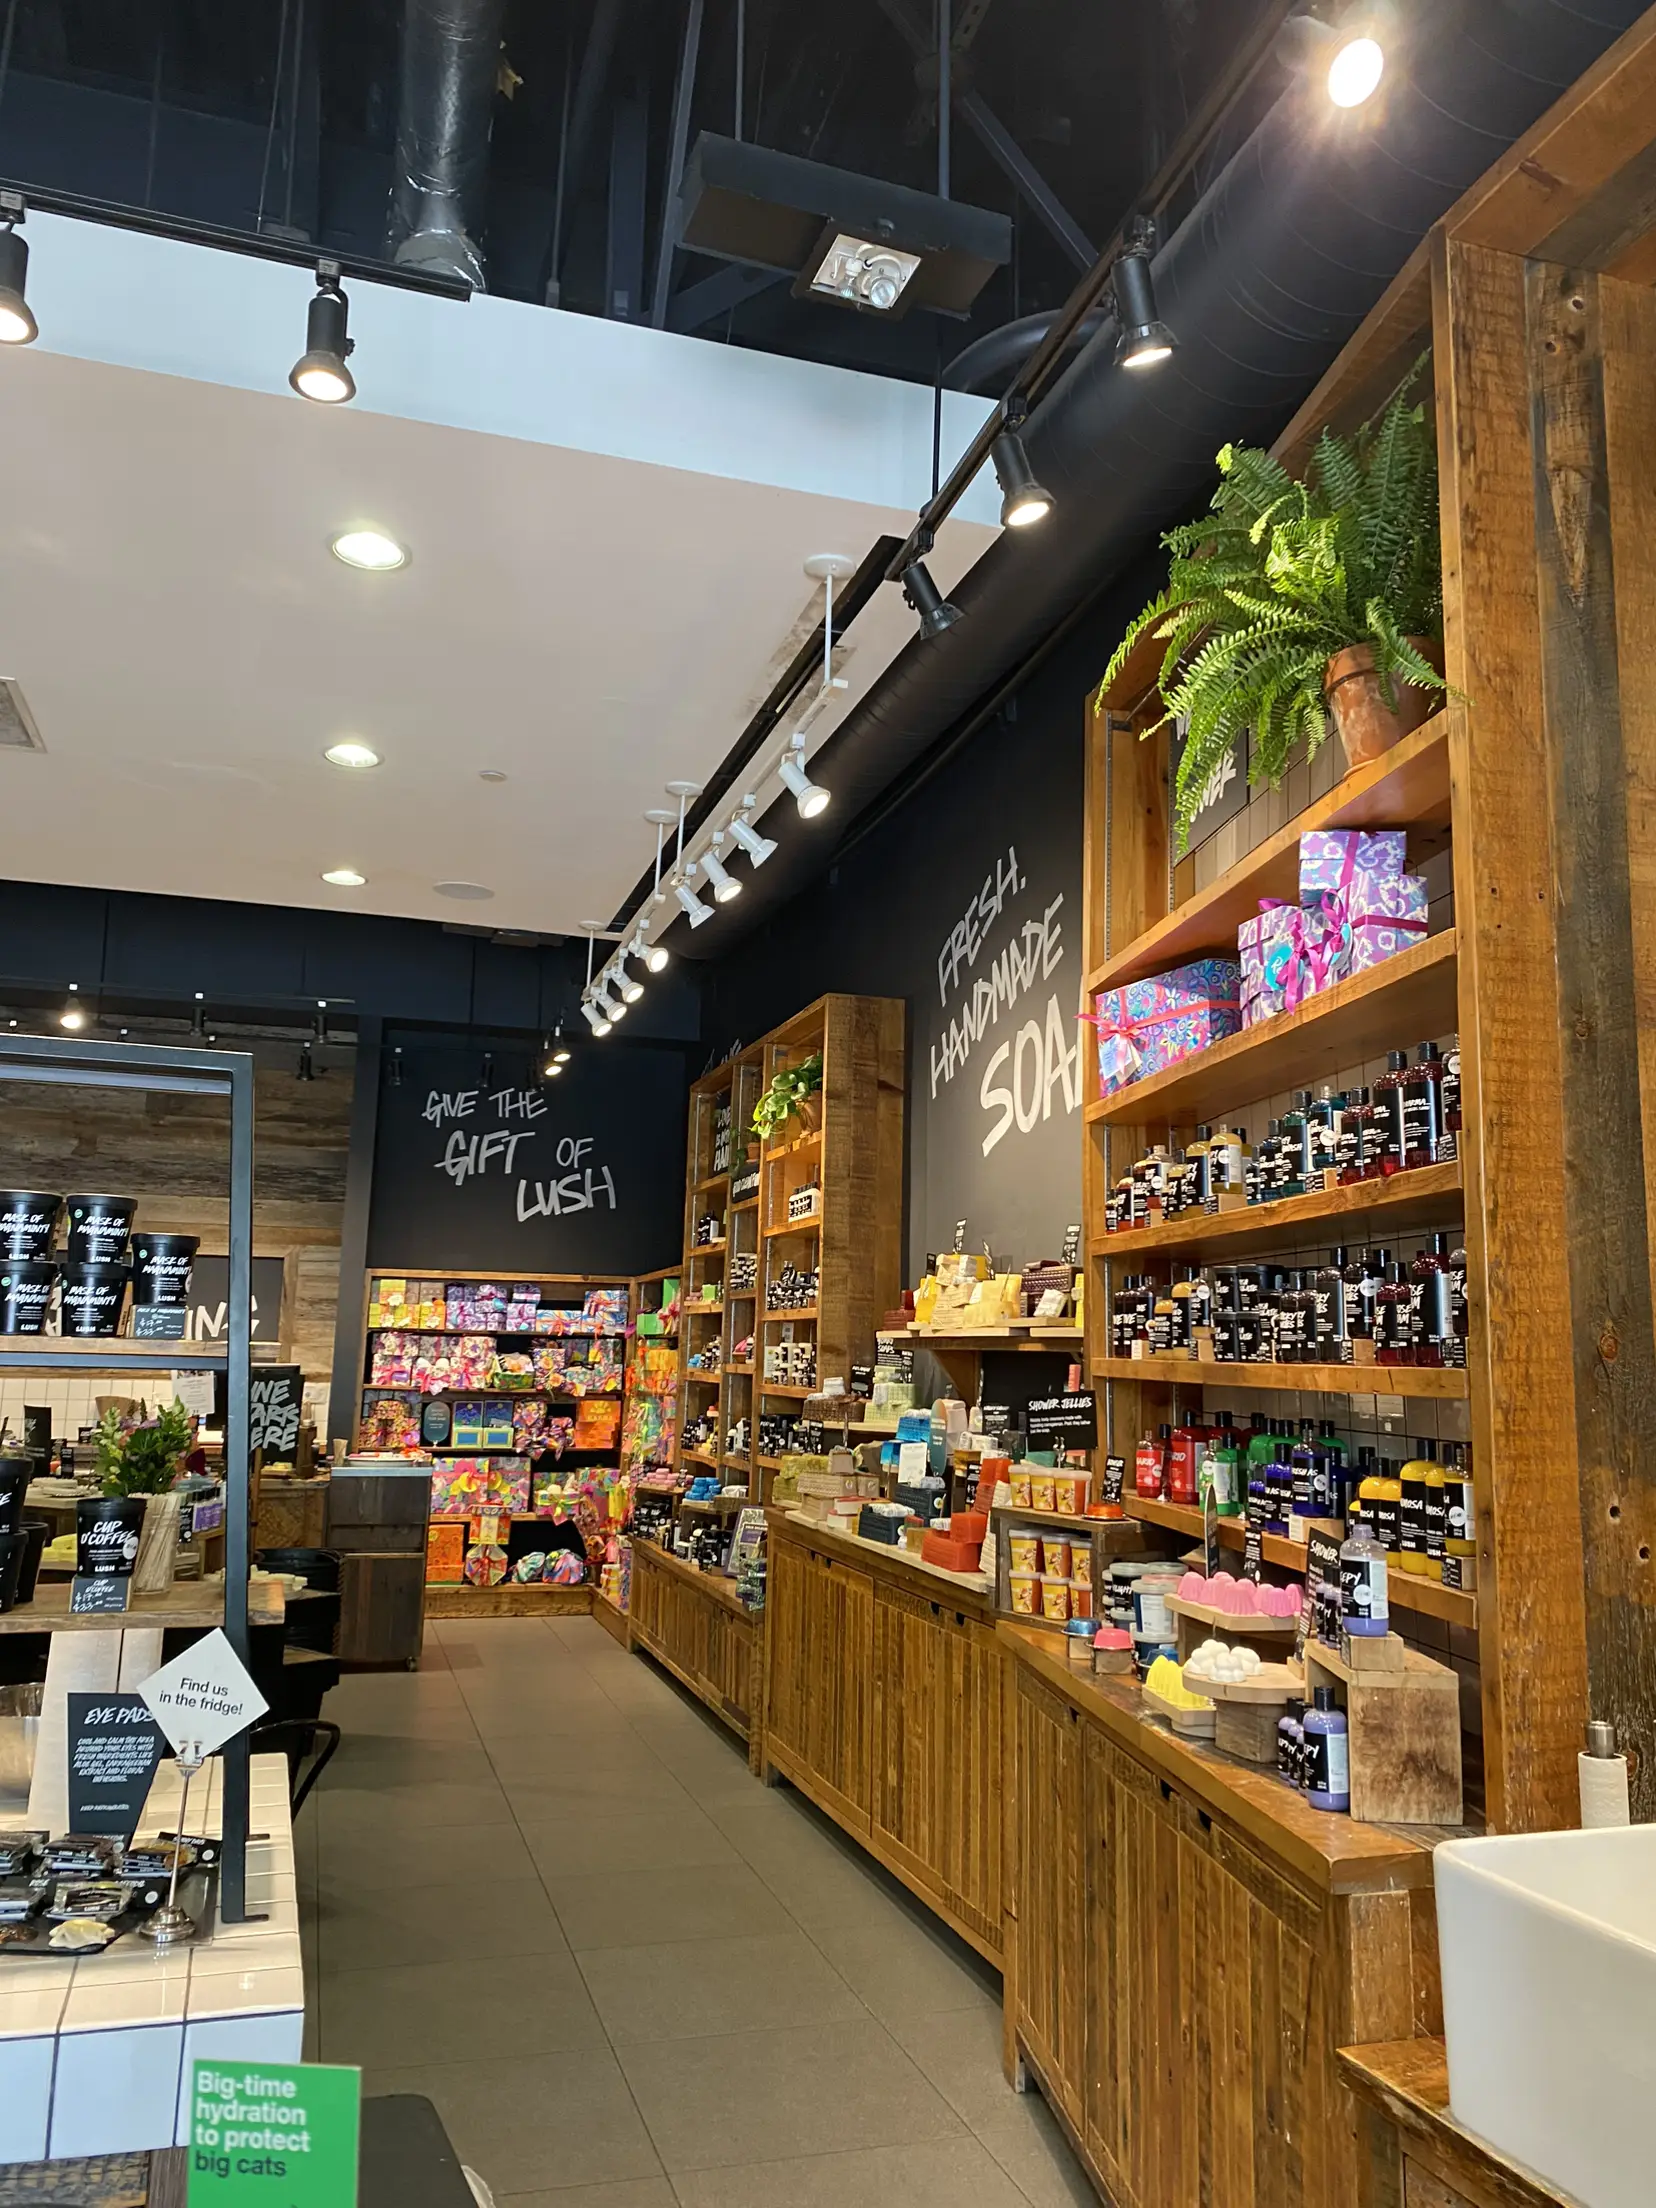  A store with a green sign that says "The Gift of Lush".